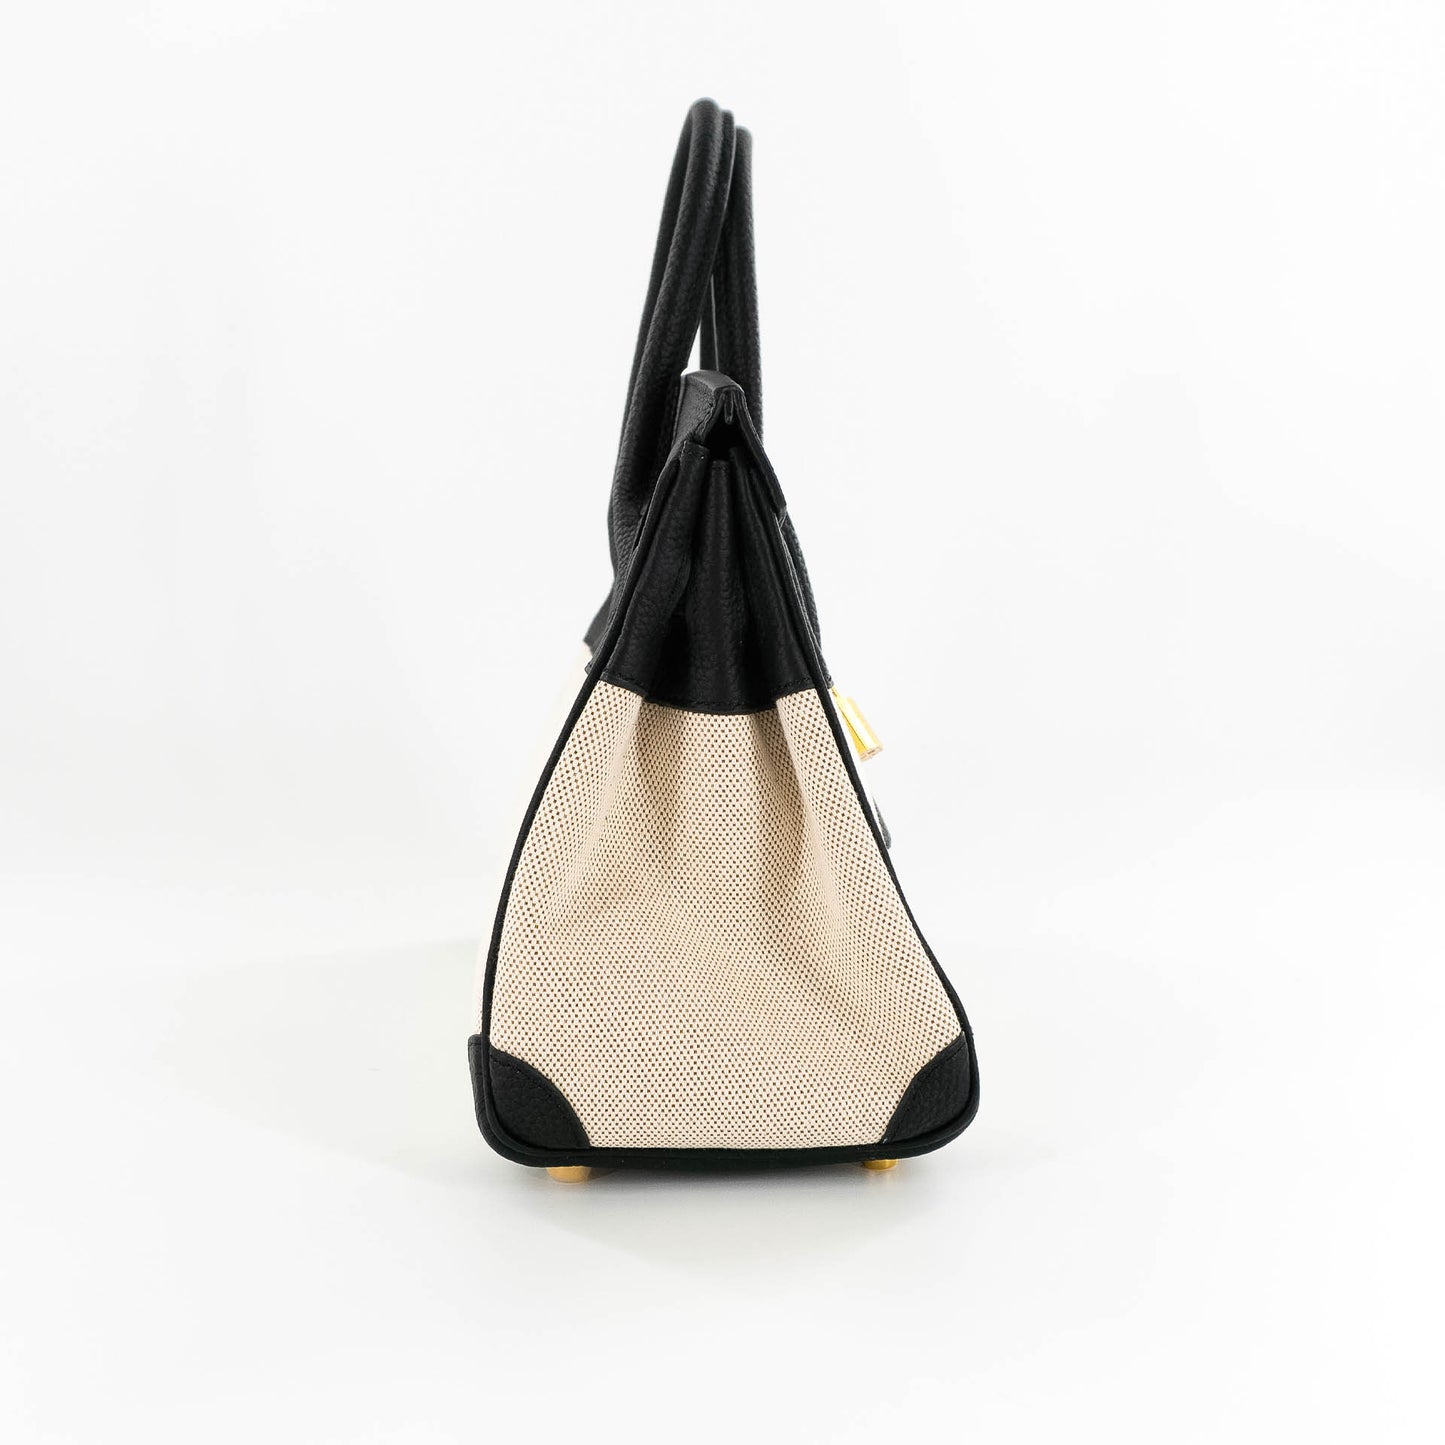 Duchess Handbag in Canvas and Black Leather